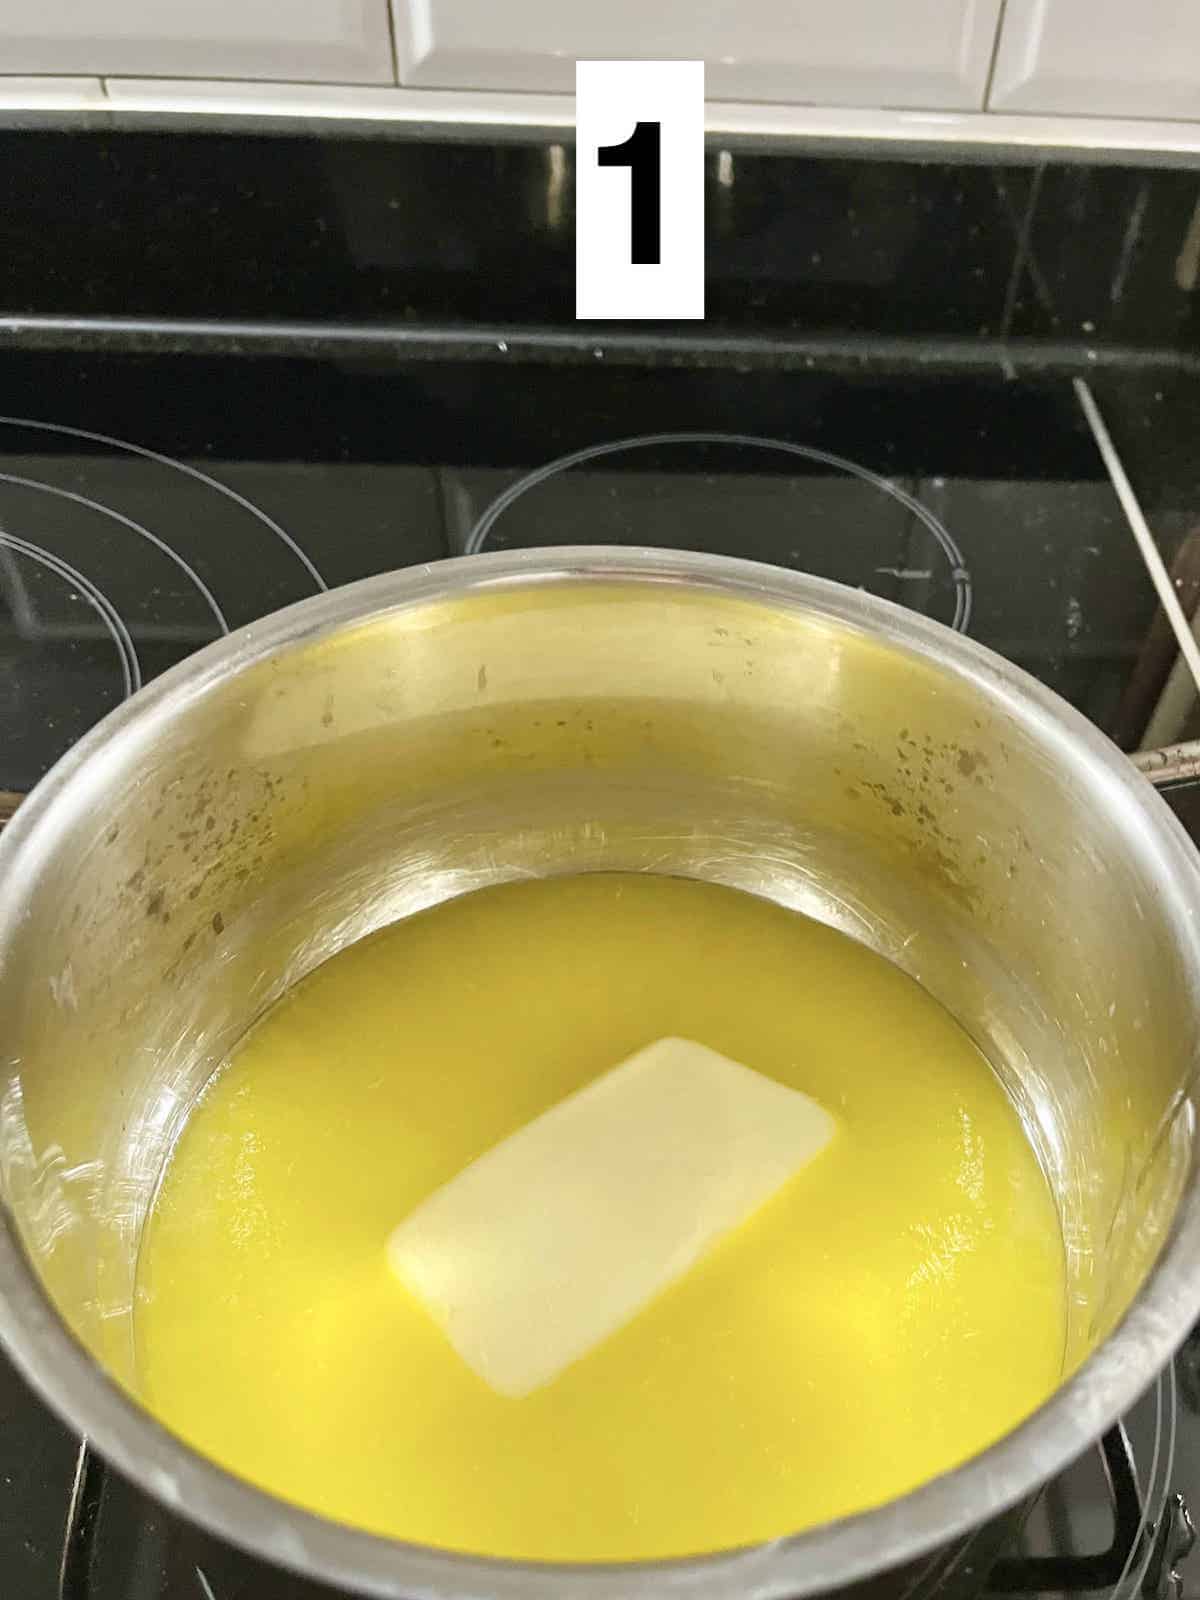 Butter melting slowly in a silver pot over an induction stove.